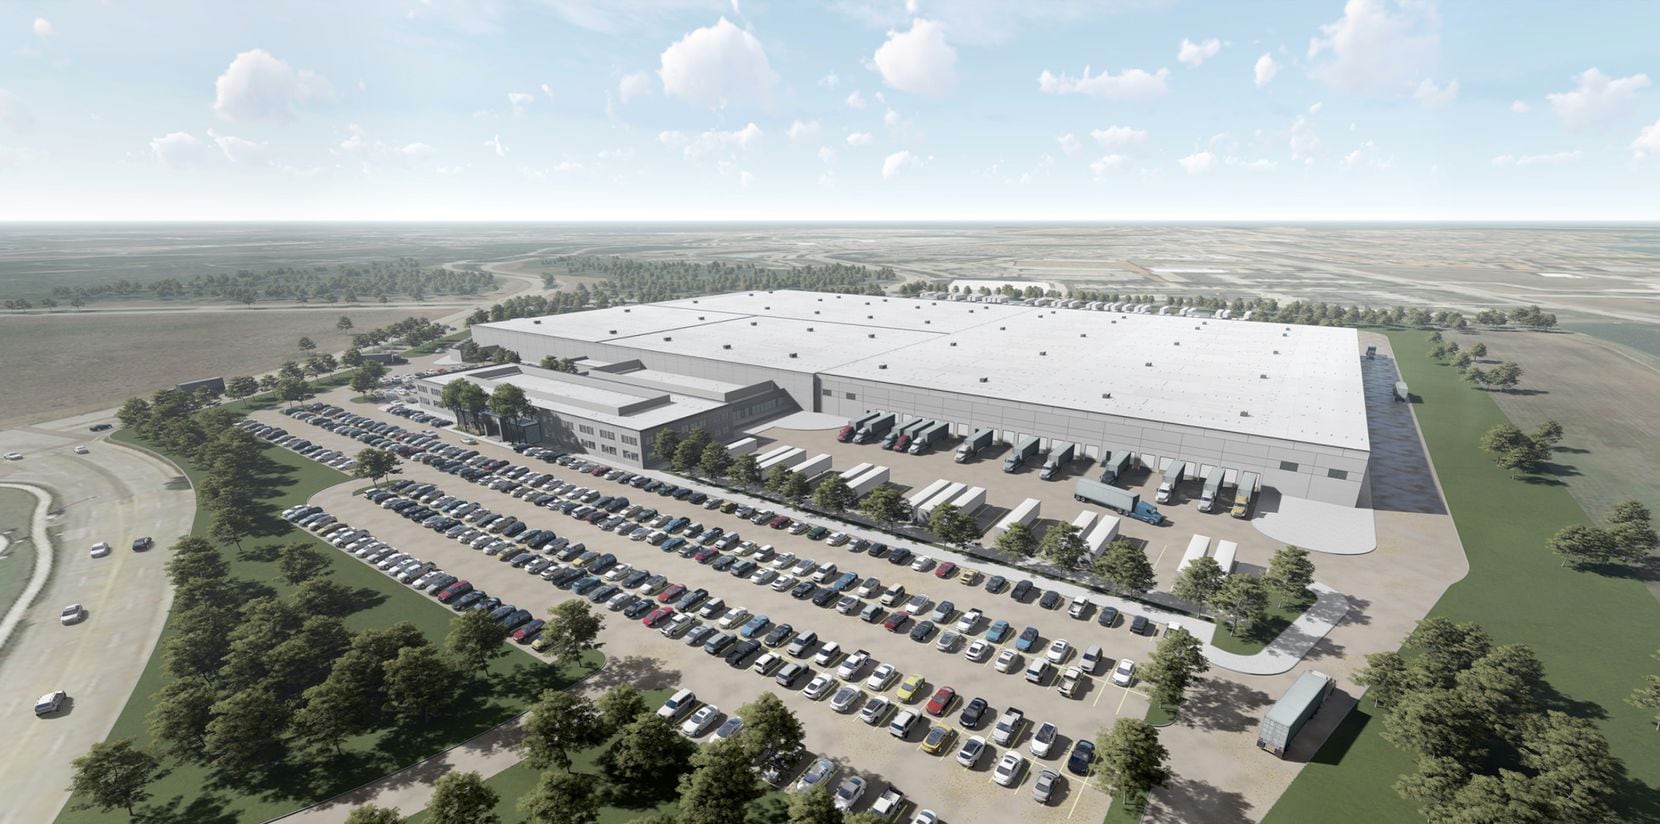 Provident Realty Advisor is buying Neiman Marcus' Irving distribution center with plans for...